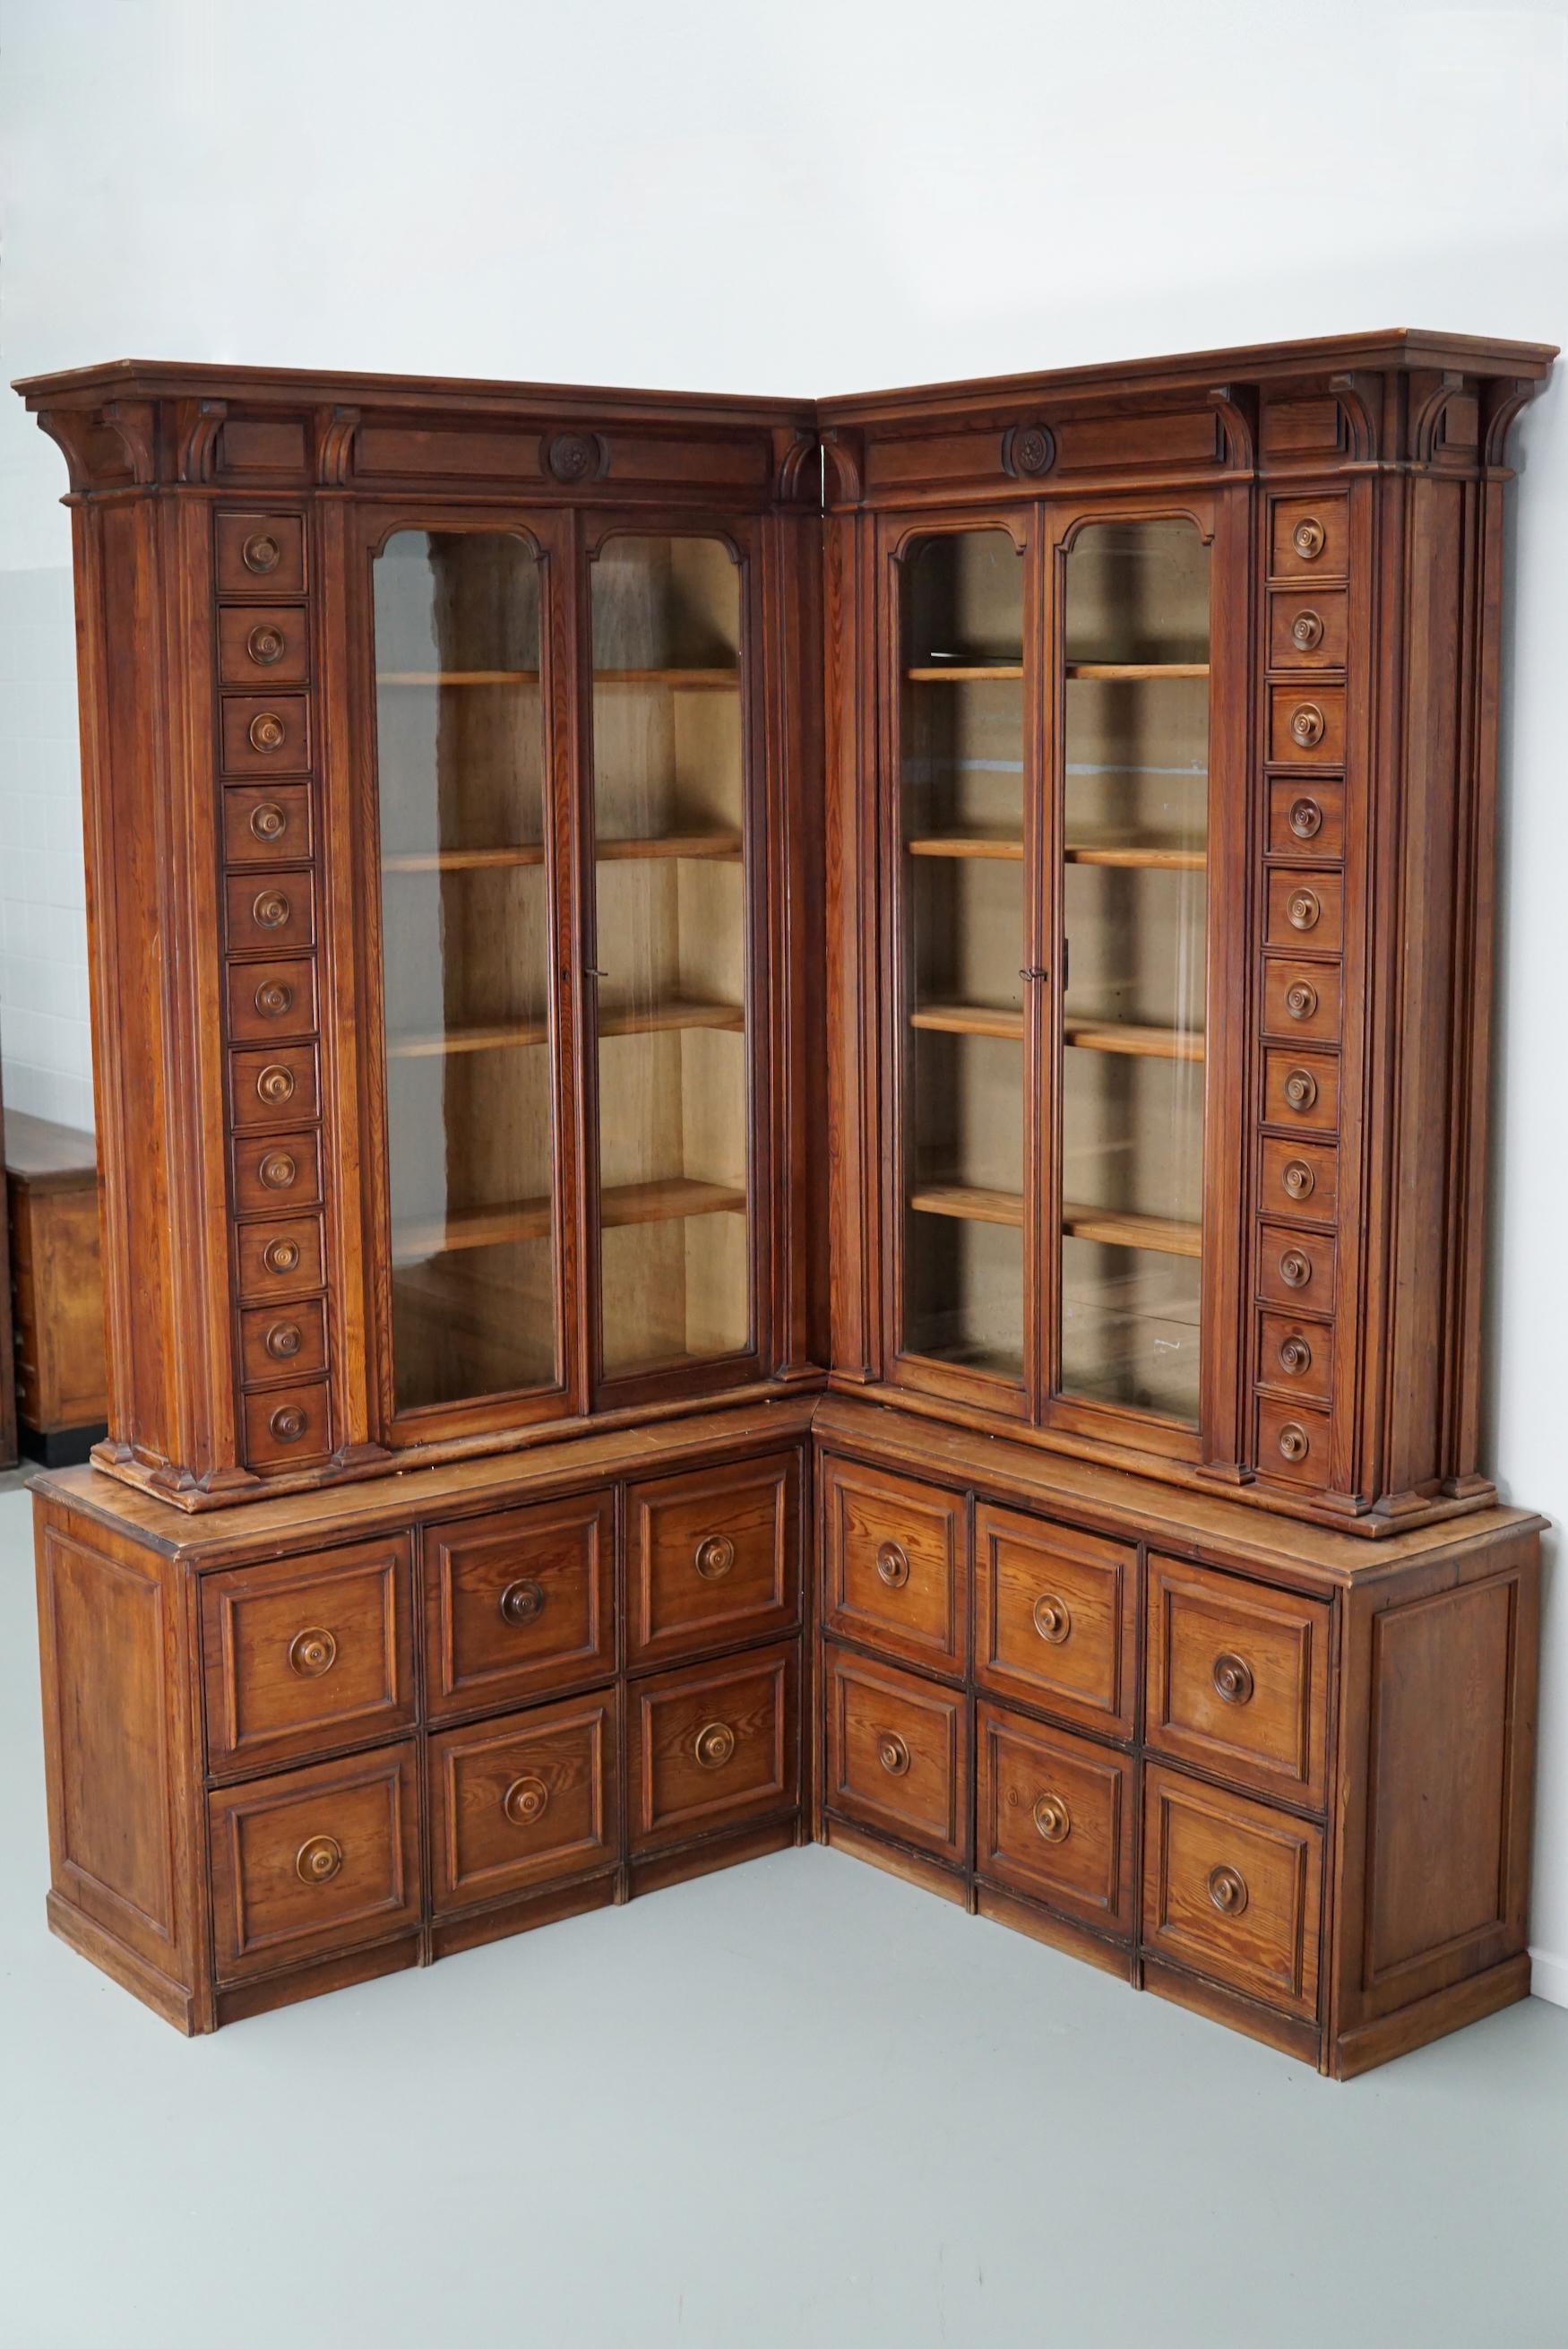 This stunning corner apothecary cabinet was made in Germany around the turn of the century. It features two vitrines with shelves and both small and large square drawers at both ends. It was very well made and retains a nice patine and colour. The